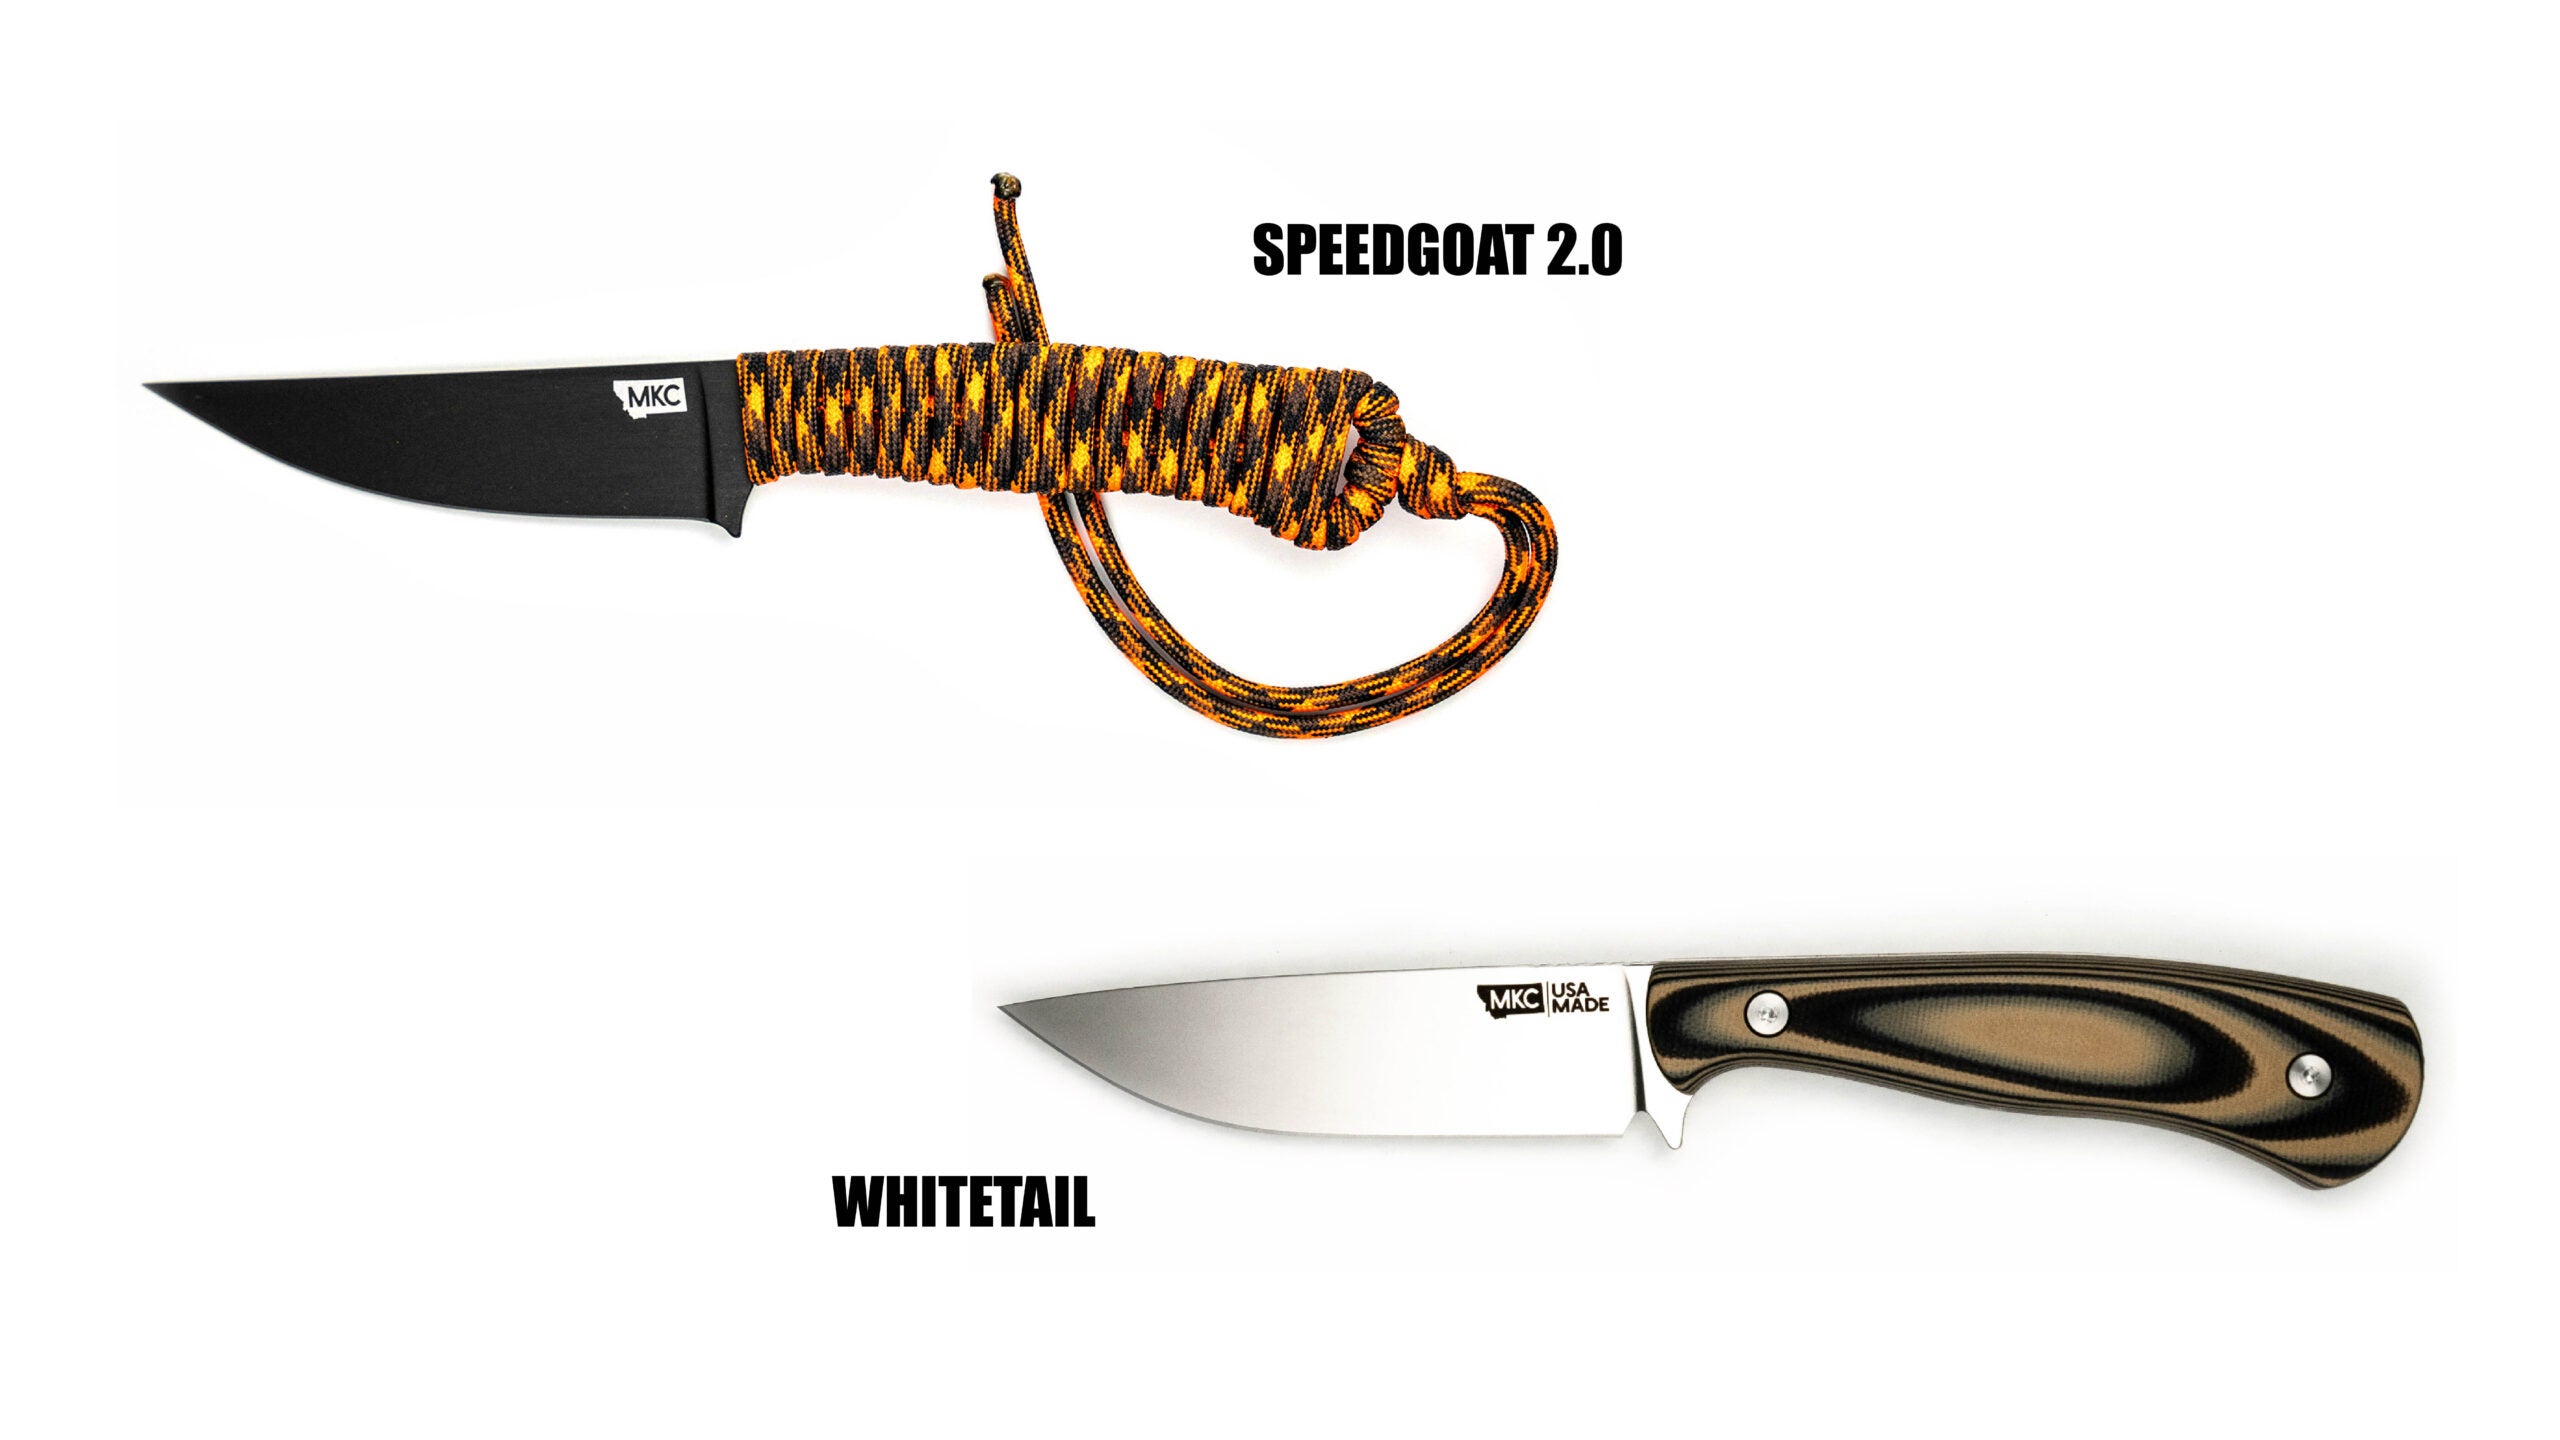 The two newest knives from the MKC collection—the Speedgoat 2.0 and the Whitetail.